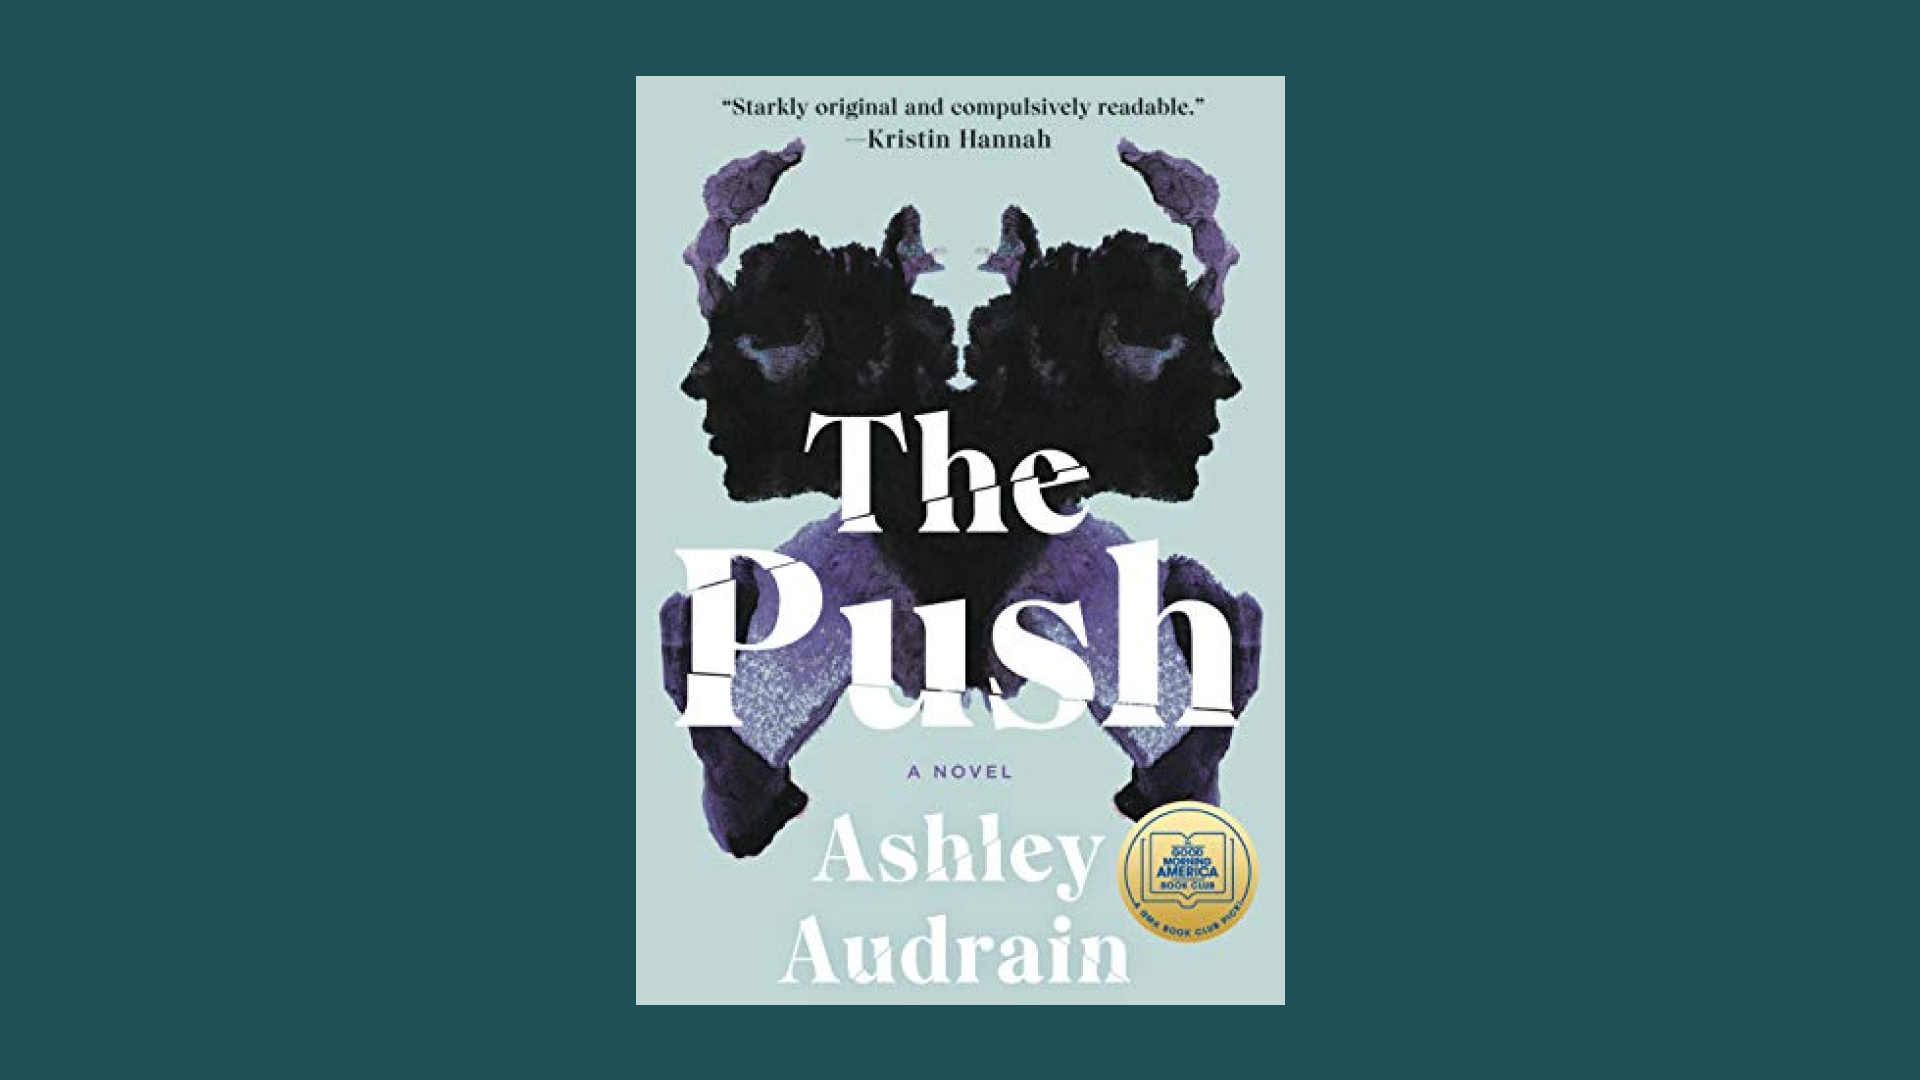 “The Push” by Ashley Audrain